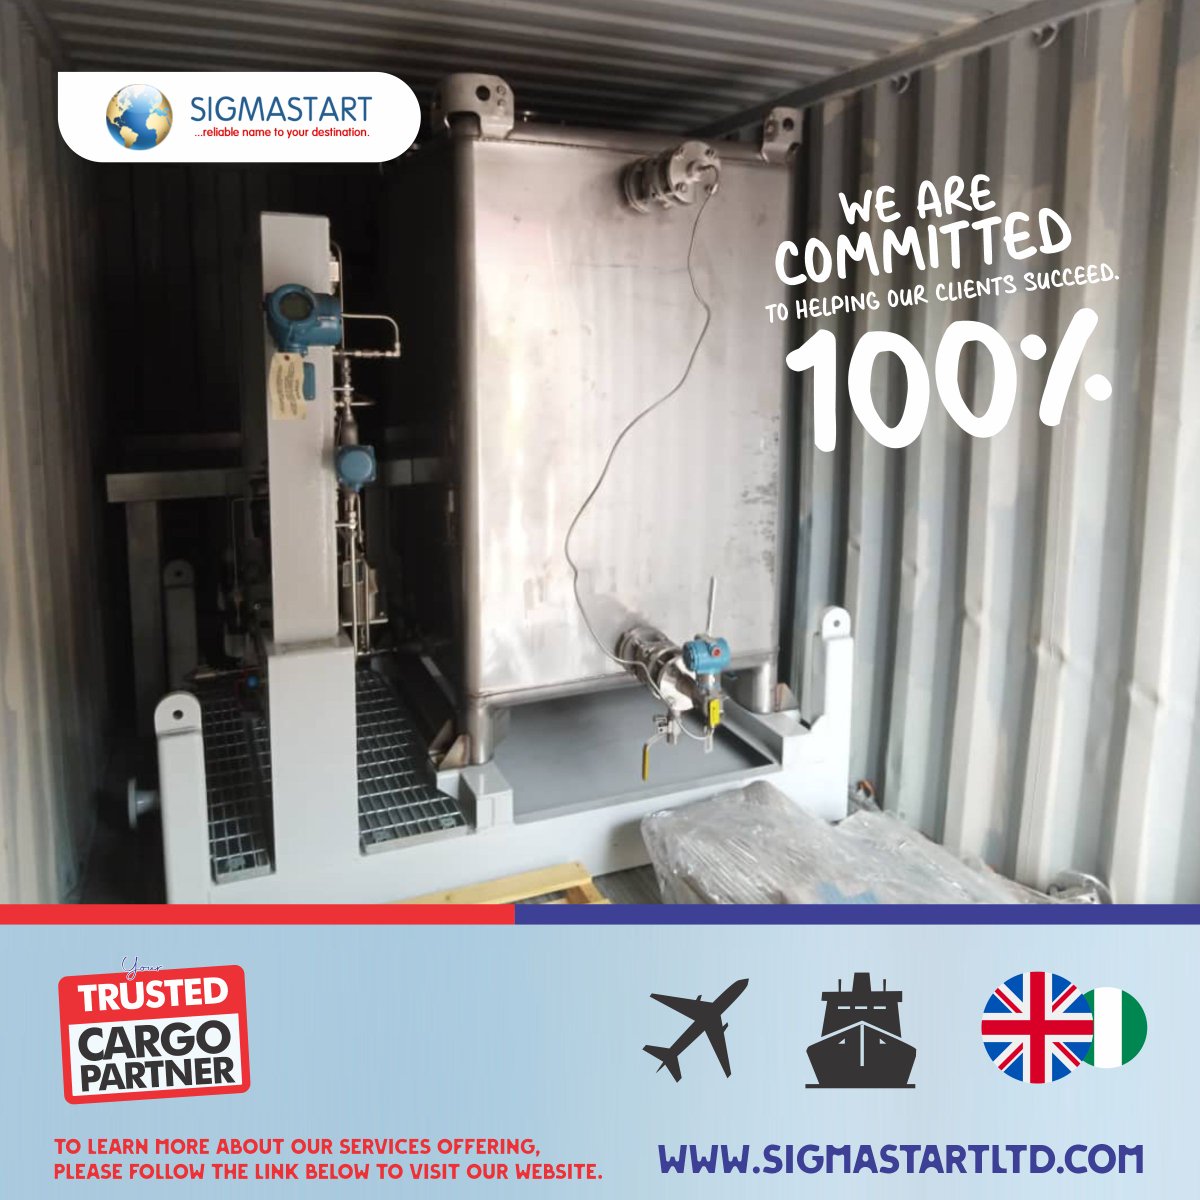 We are committed to helping our clients succeed...100%

#doorstepdelivery #corporateclient #nigeriansindiaspora #london #cargotonaija #uk2naija #uk #southlondon #nigeriansindiaspora #china #france #germany #india #sea #shipping #shippingcontainer #airfreight